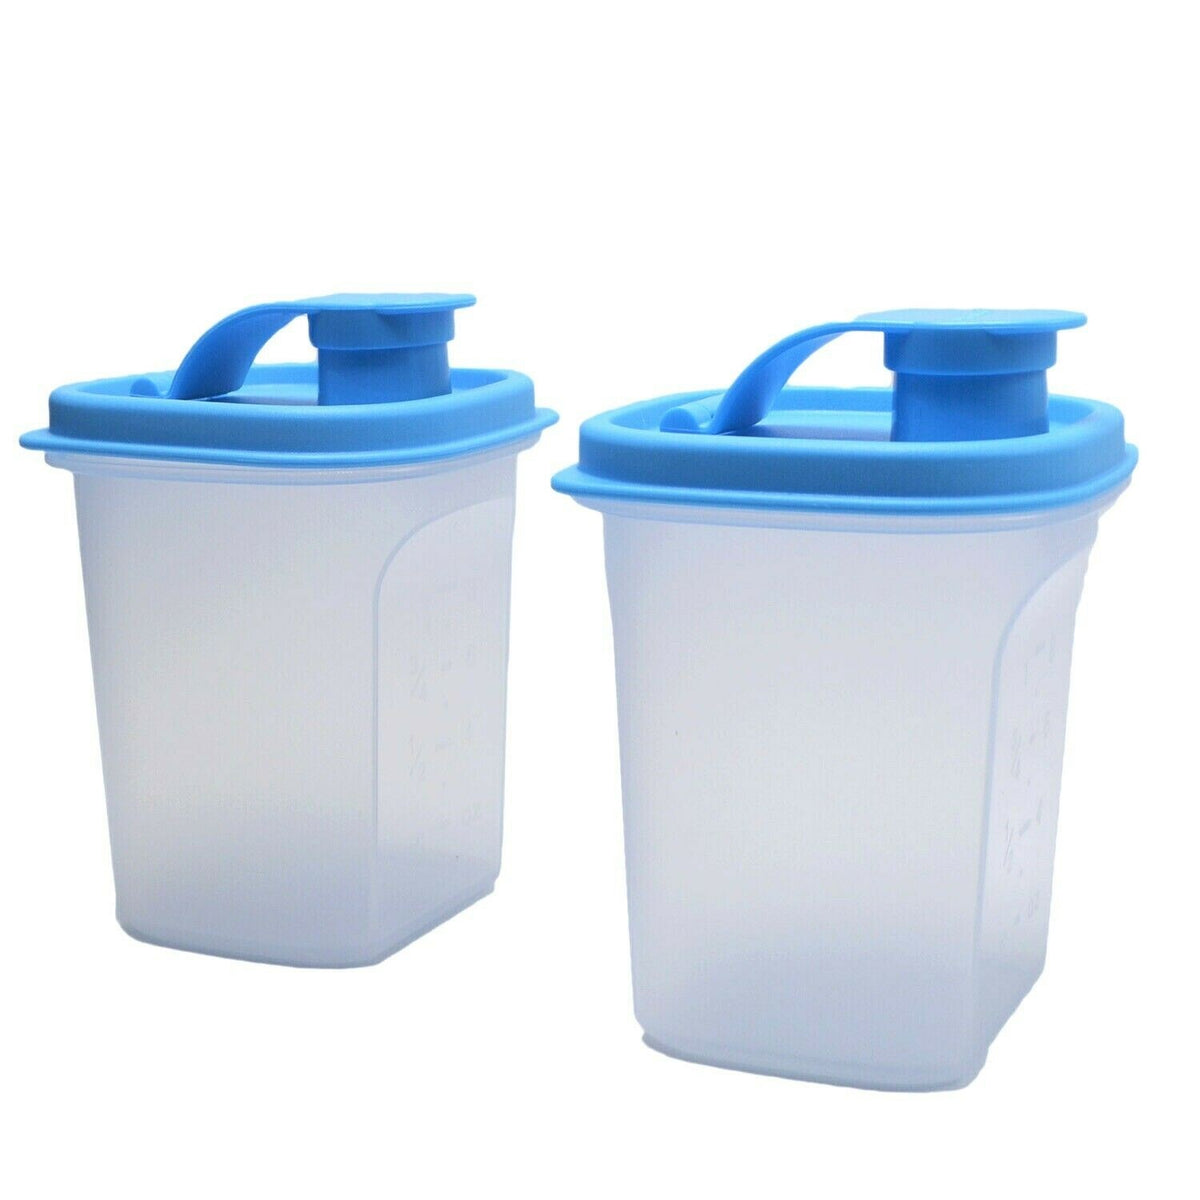 Tupperware CLASSIC SMALL CONTAINERS 6 piece Set Includes two each: 1-cup  240 mL 2-cup 500 mL and 3 cup 800 mL containers with seals